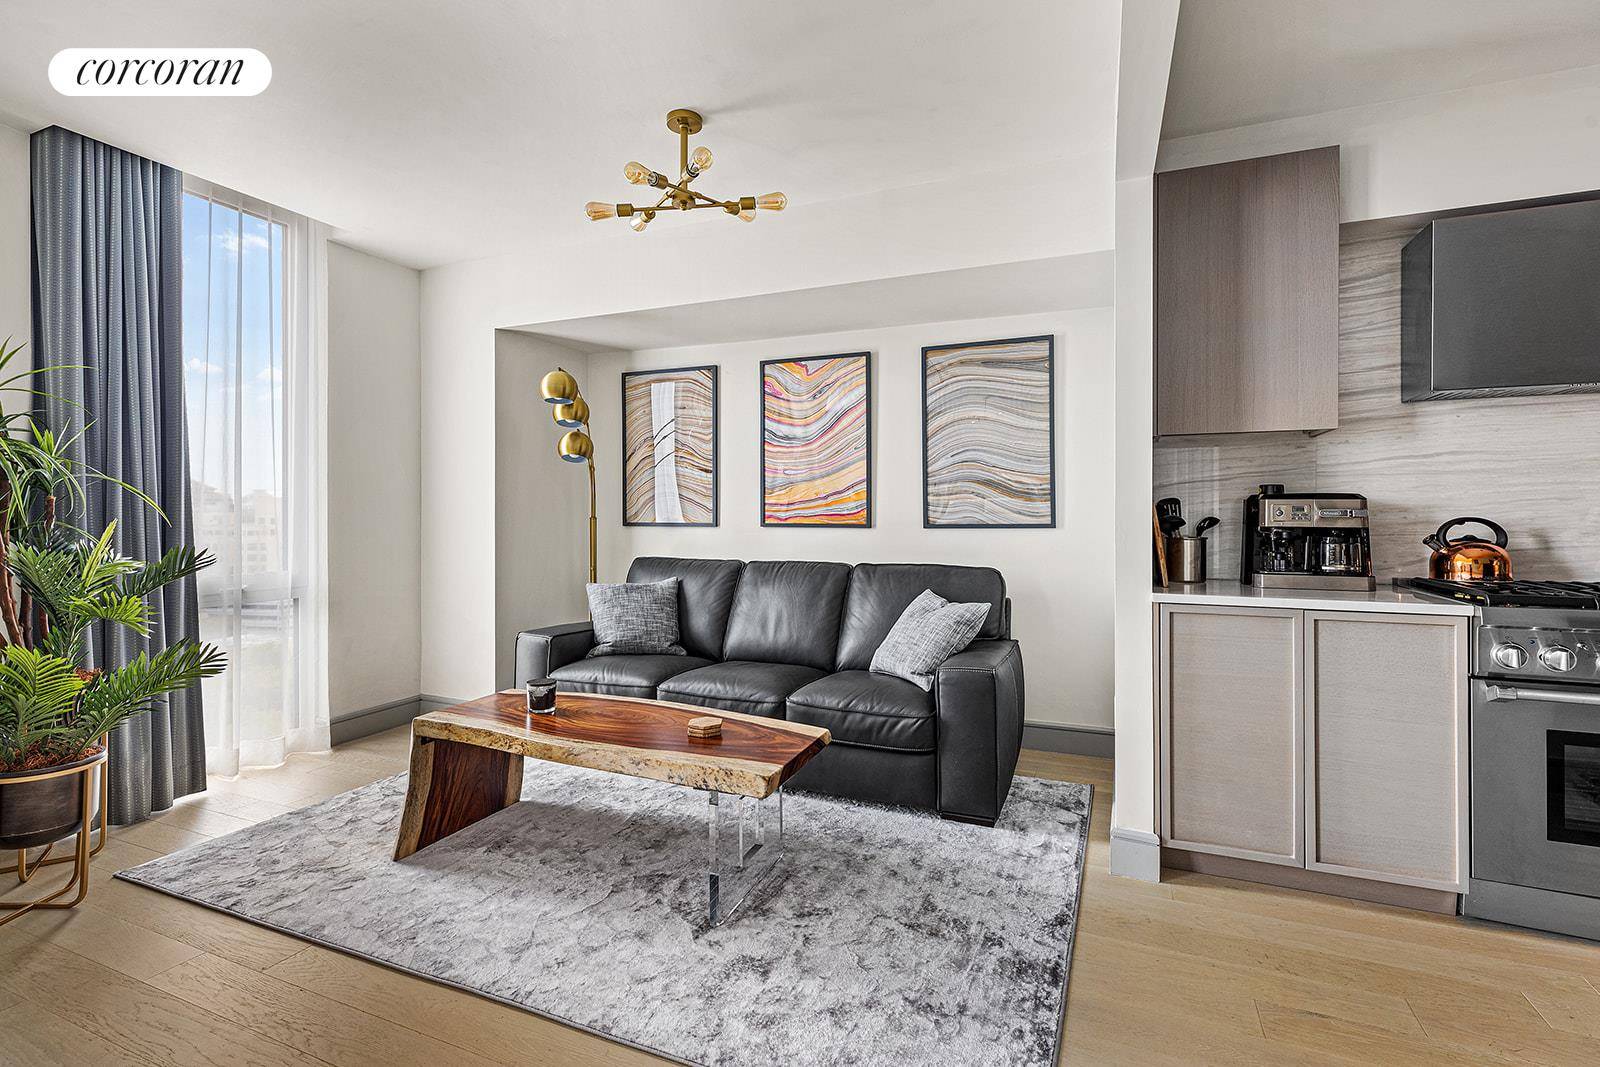 1399 Park Avenue is a full service building with a suite of amenities.